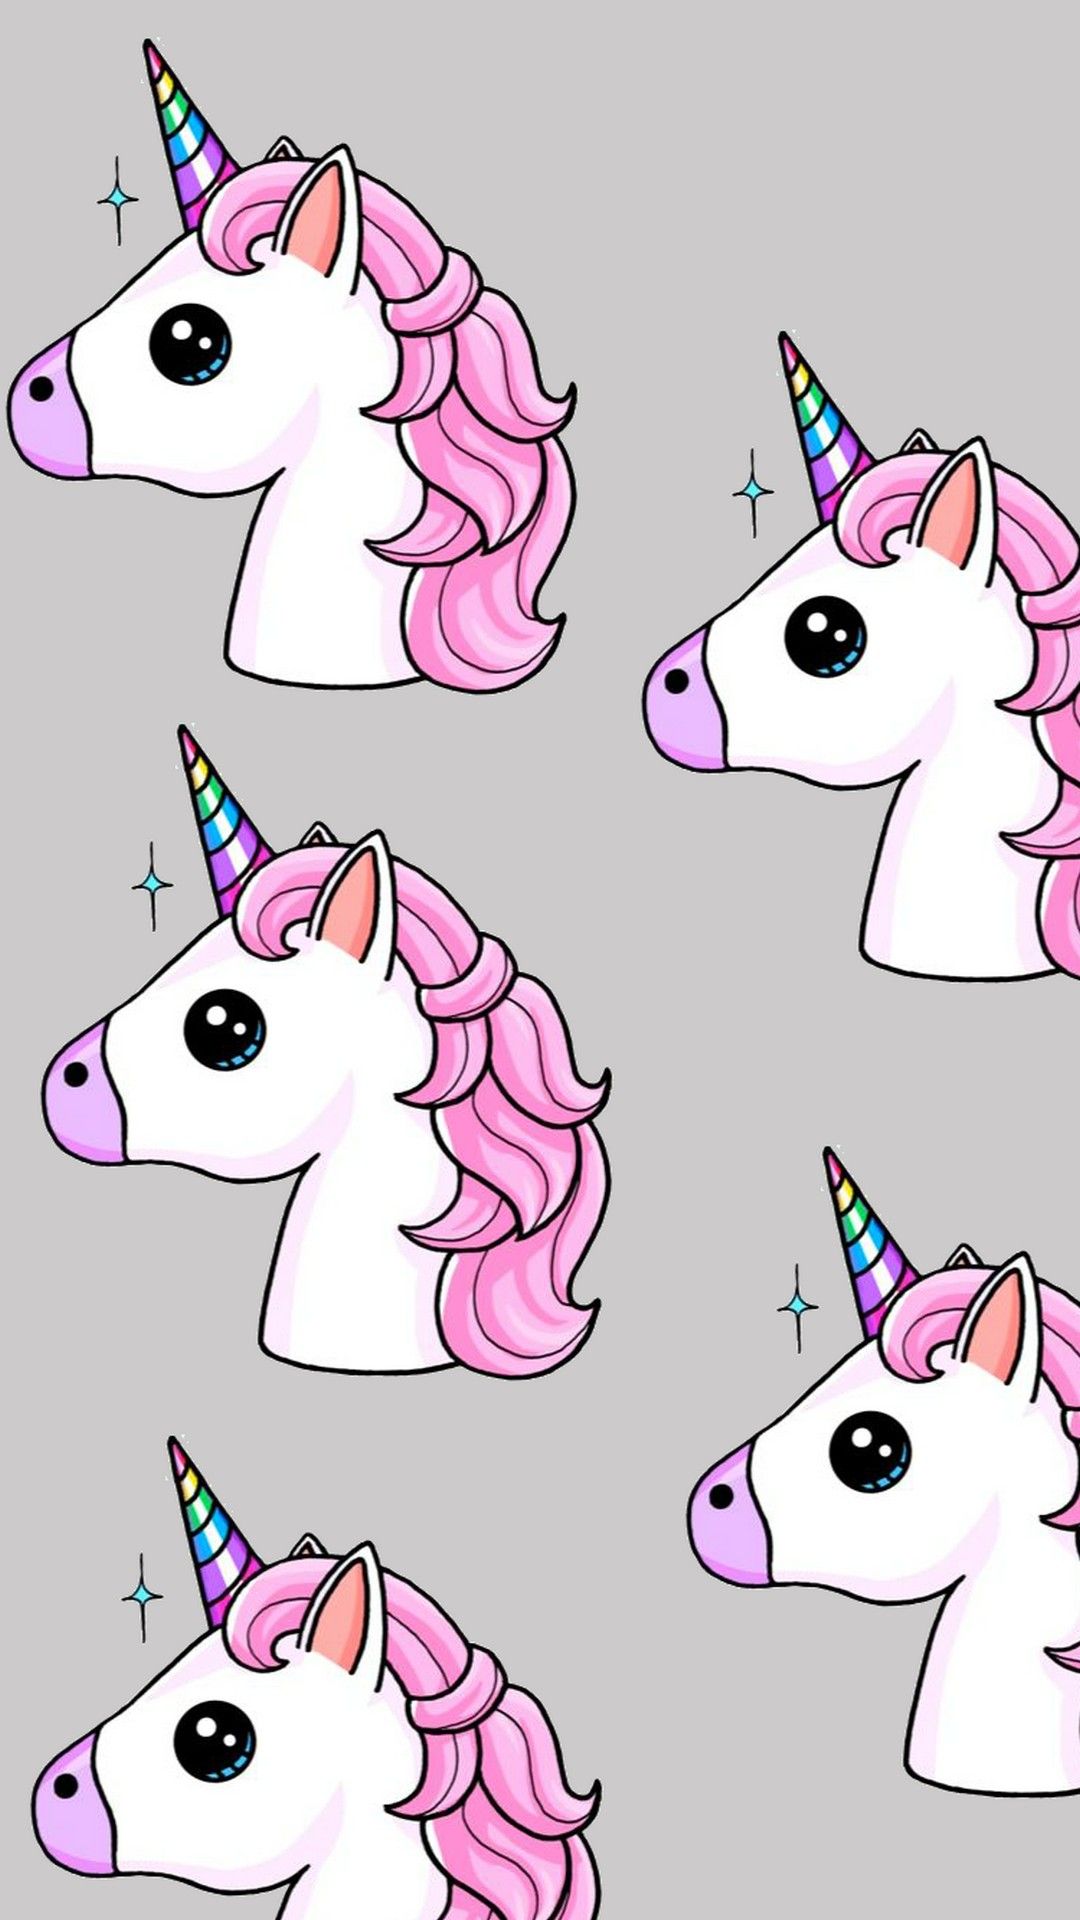 Cute Unicorn Wallpaper For Android Android Wallpaper